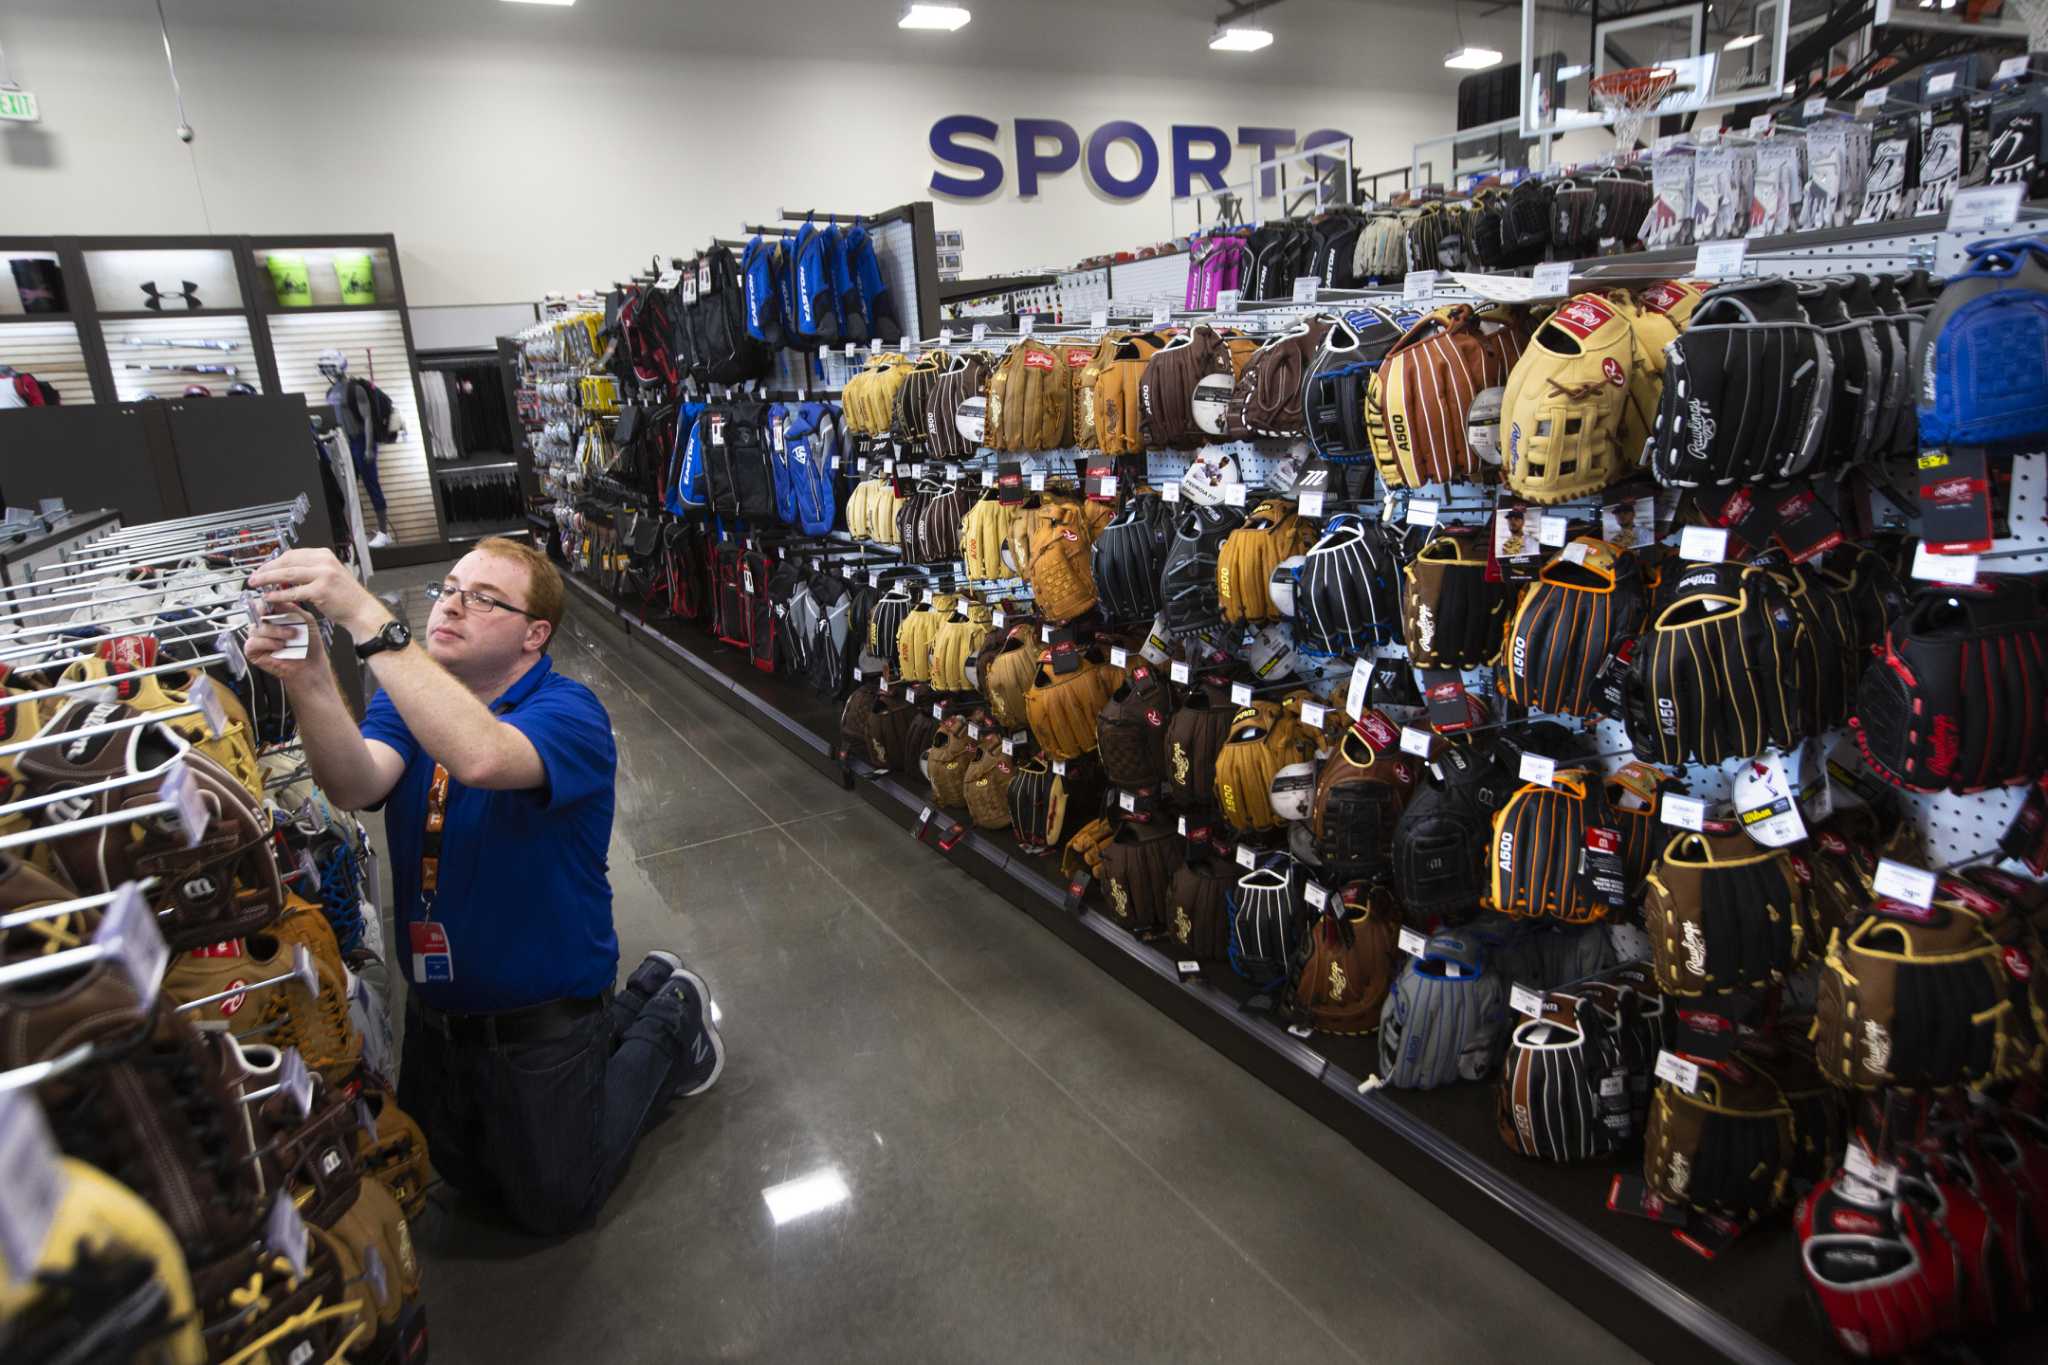 Academy Sports unveils new prototype amid growing competition